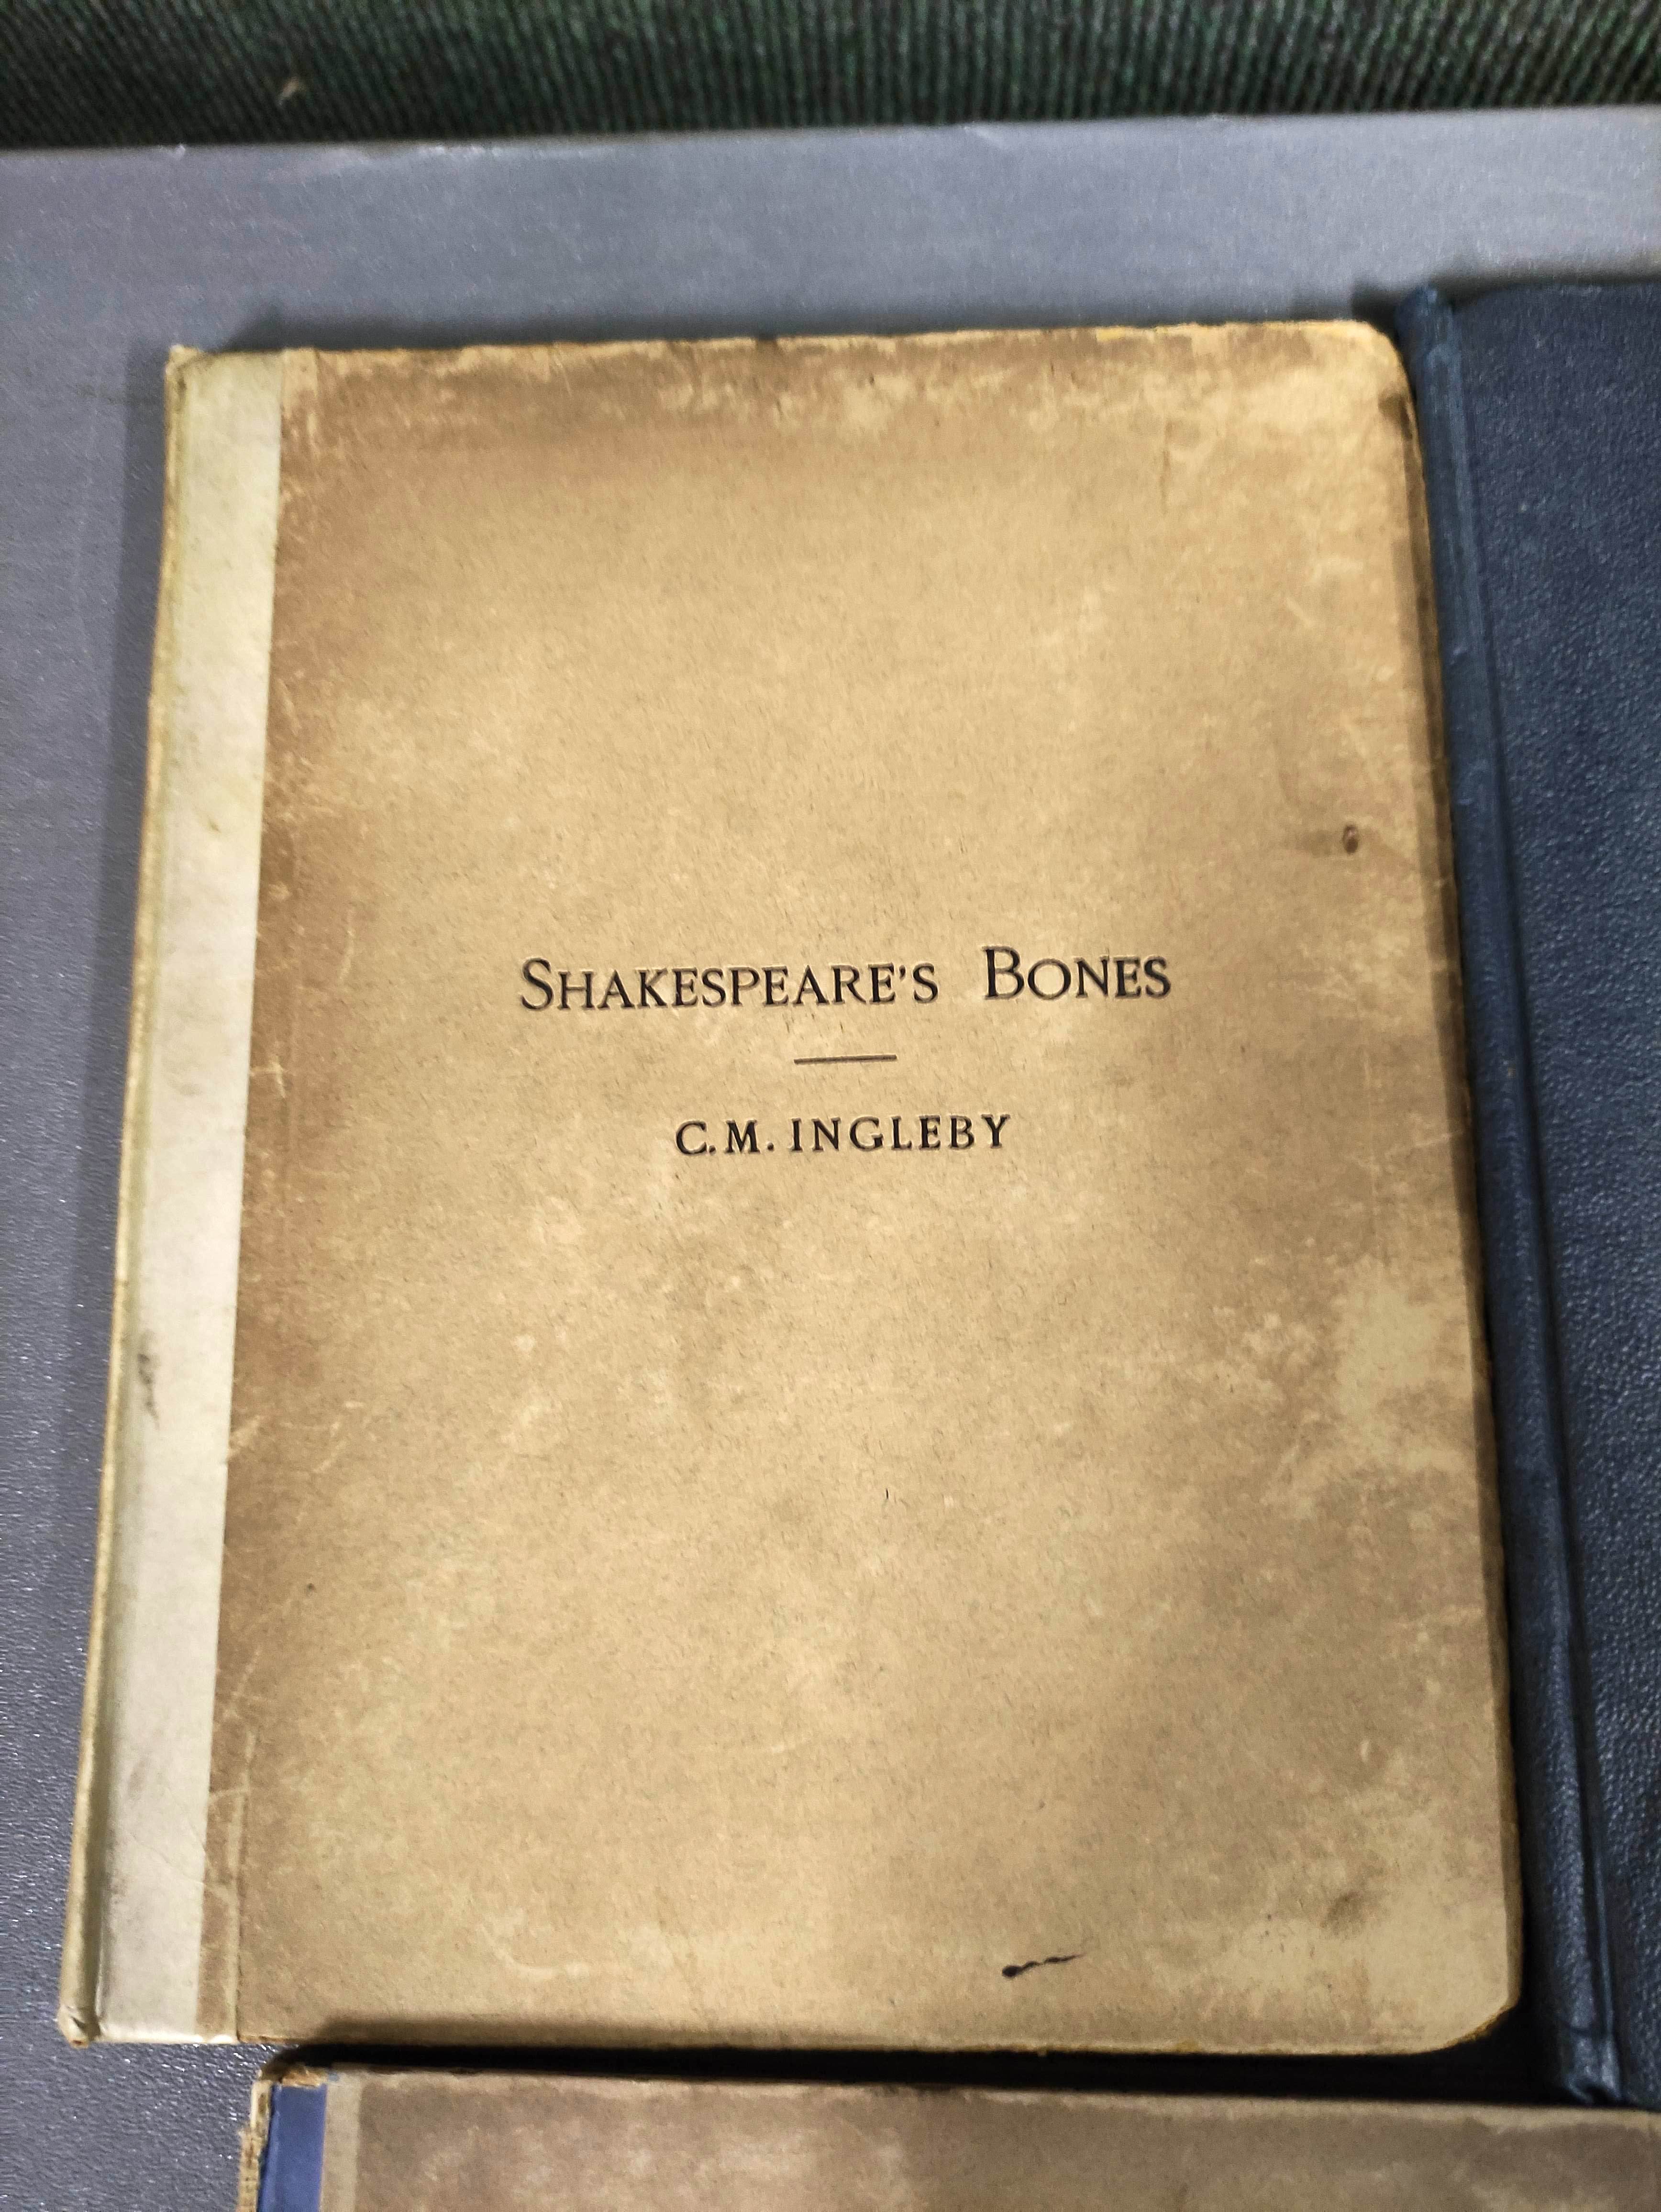 SHAKESPEARE WILLIAM.  6 vols. re. Shakespeare & his works, incl. More About Shakespeare "Forgeries", - Image 2 of 11